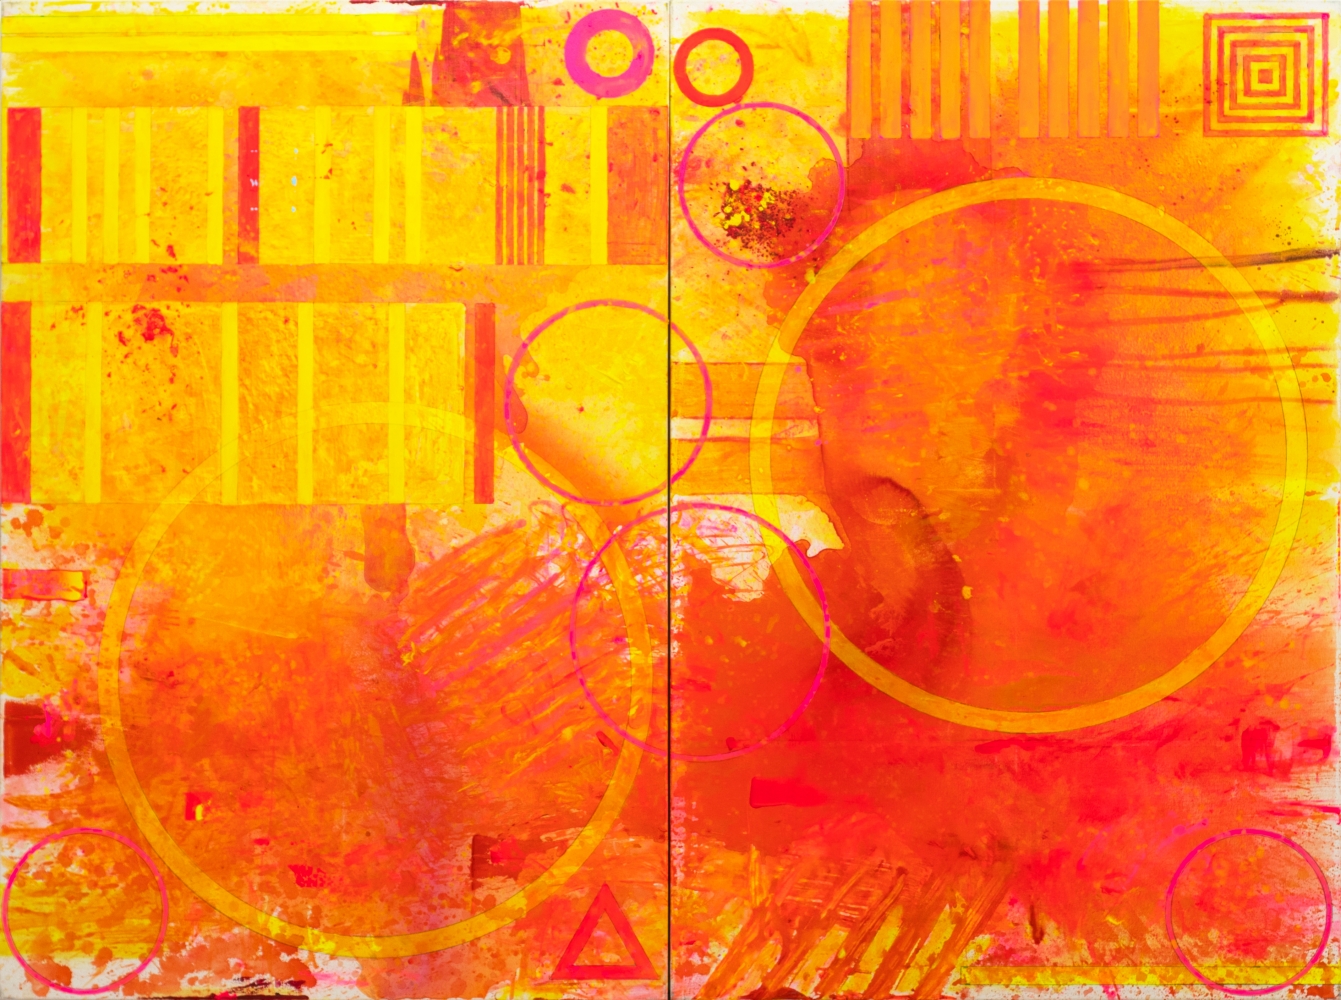 J. Steven Manolis,  Biscayne Bay (Sunrise), 2020, Acrylic on canvas, 2 panels-72x96 inches, Geometric Abstract Art, Miami Wall art For sale at Manolis Projects Art Gallery, Miami Fl